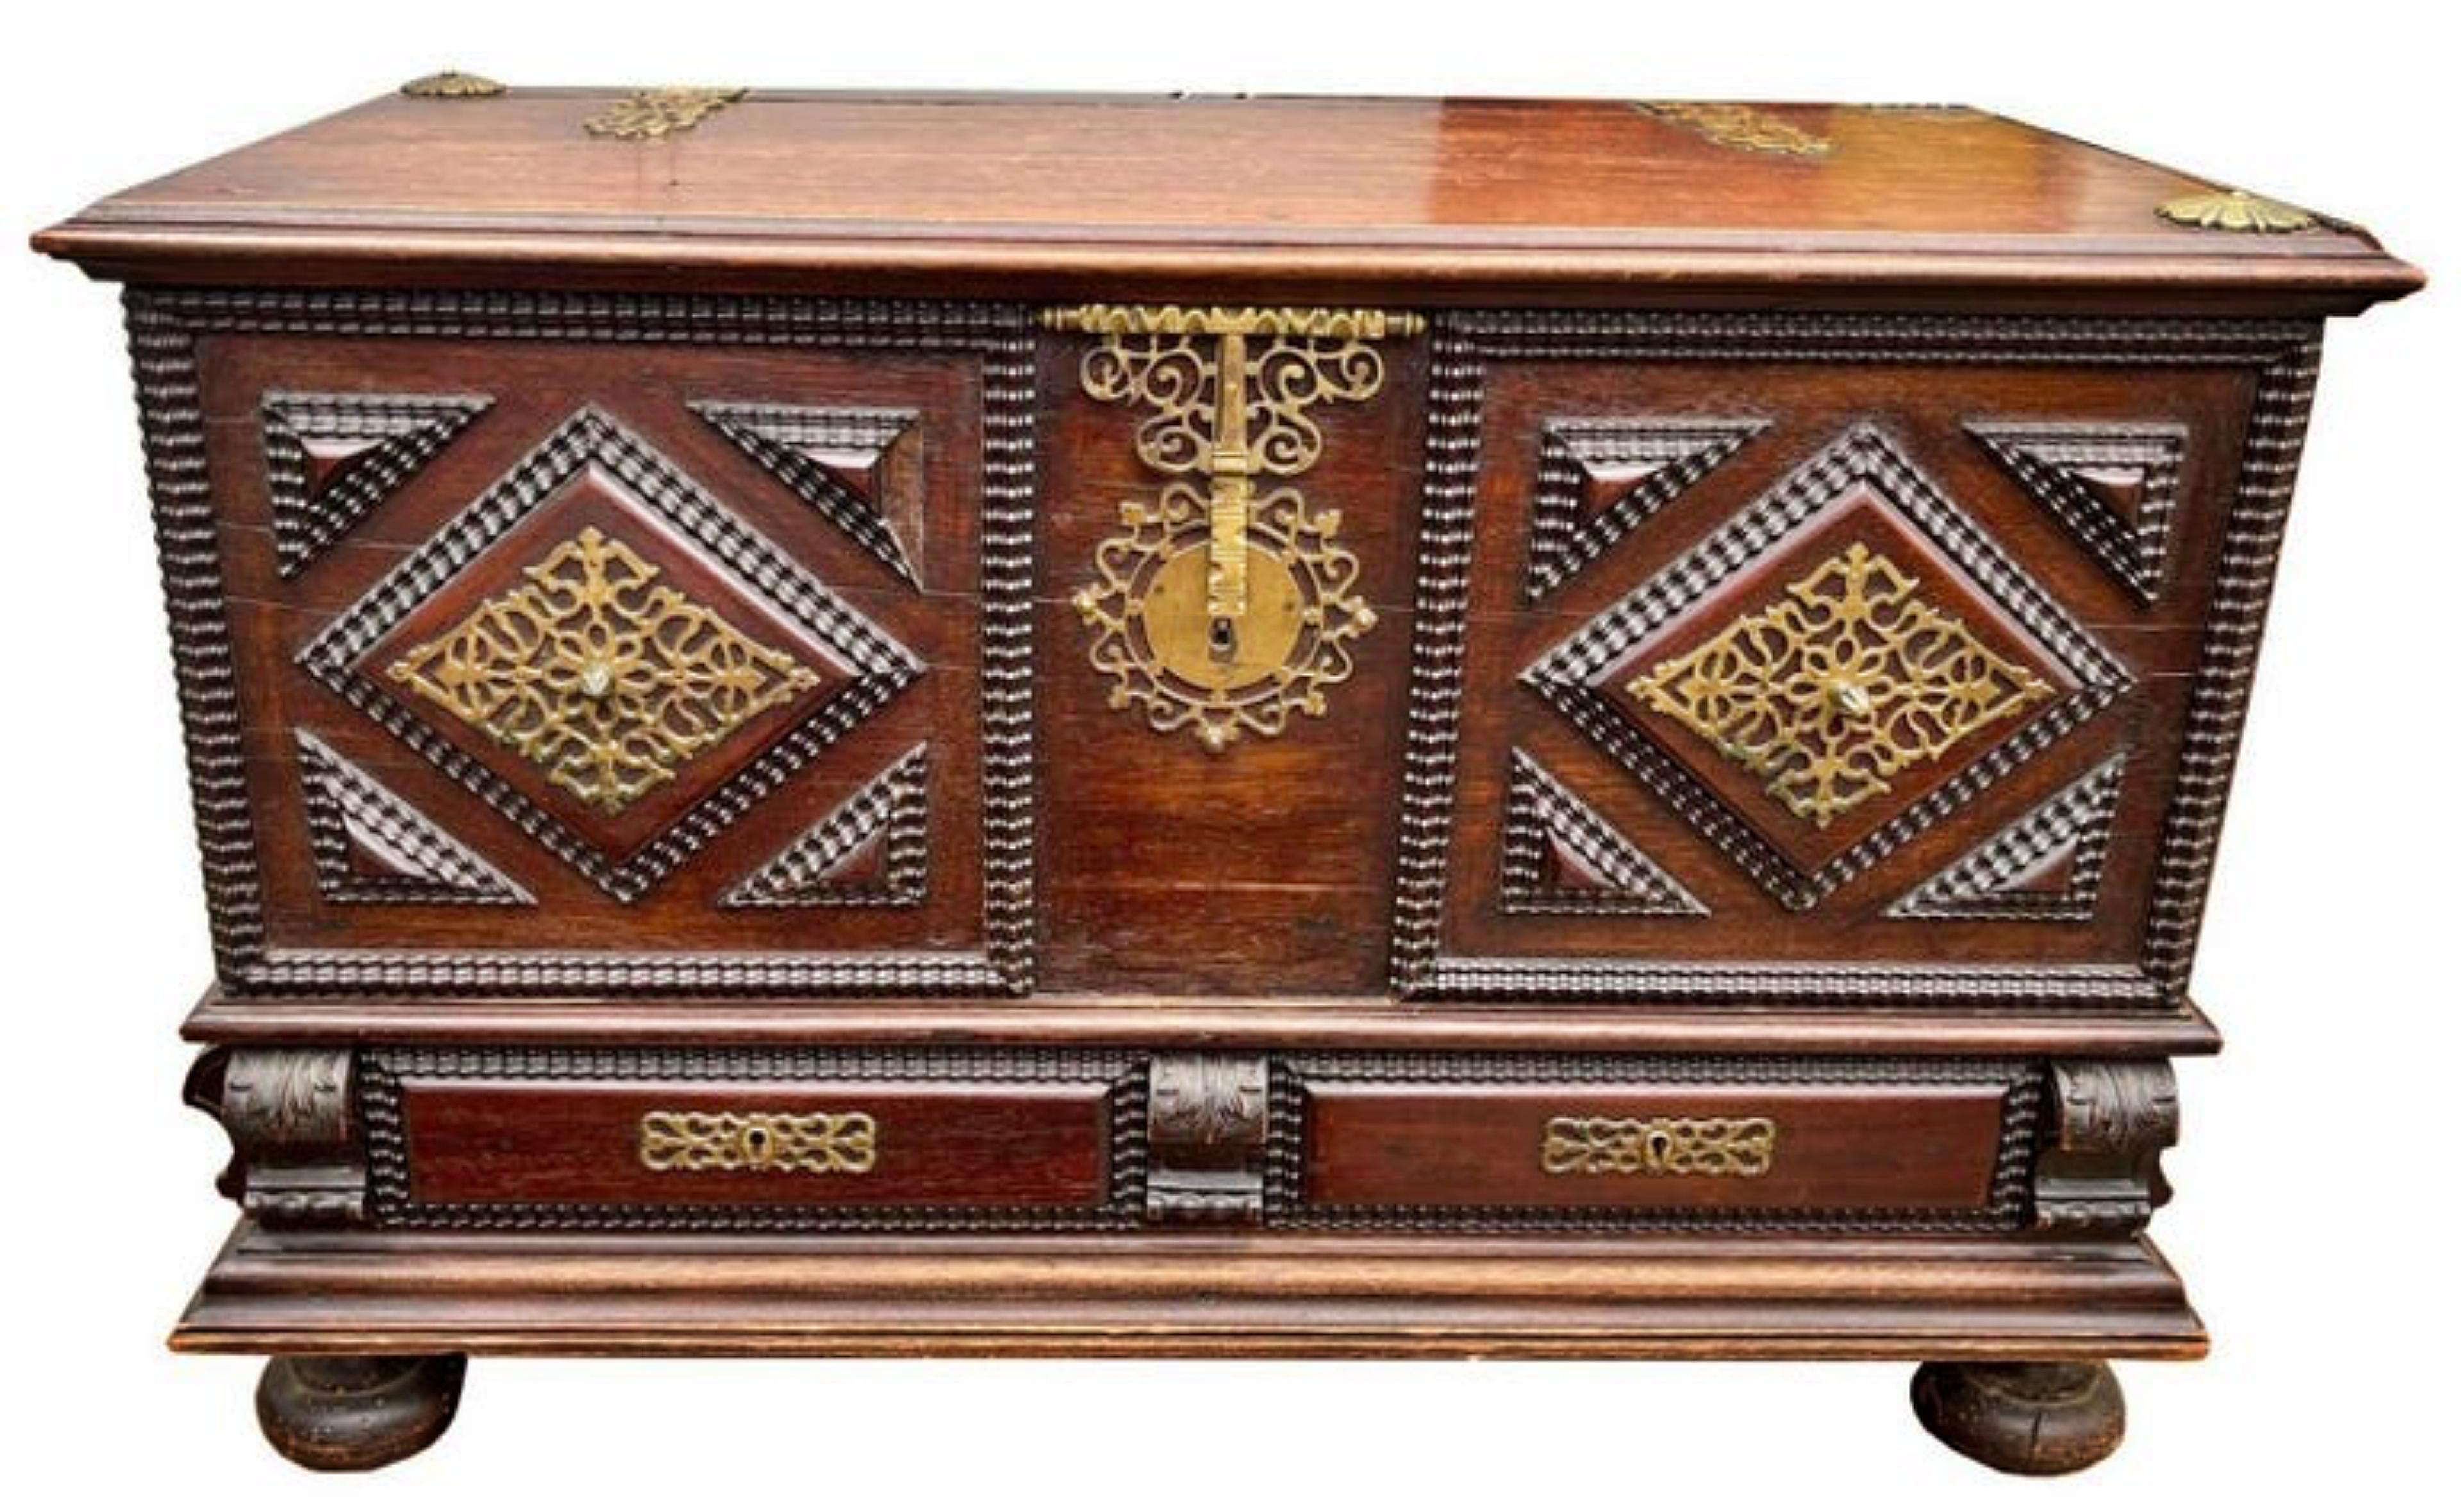 Portuguese chest with two drawers 19th century

in mahogany wood, cushions with bands and shimmering friezes in rosewood, bronze mounts in relief, cut and lace. Dimensions: 62 x 93 x 46 cm
good condition.